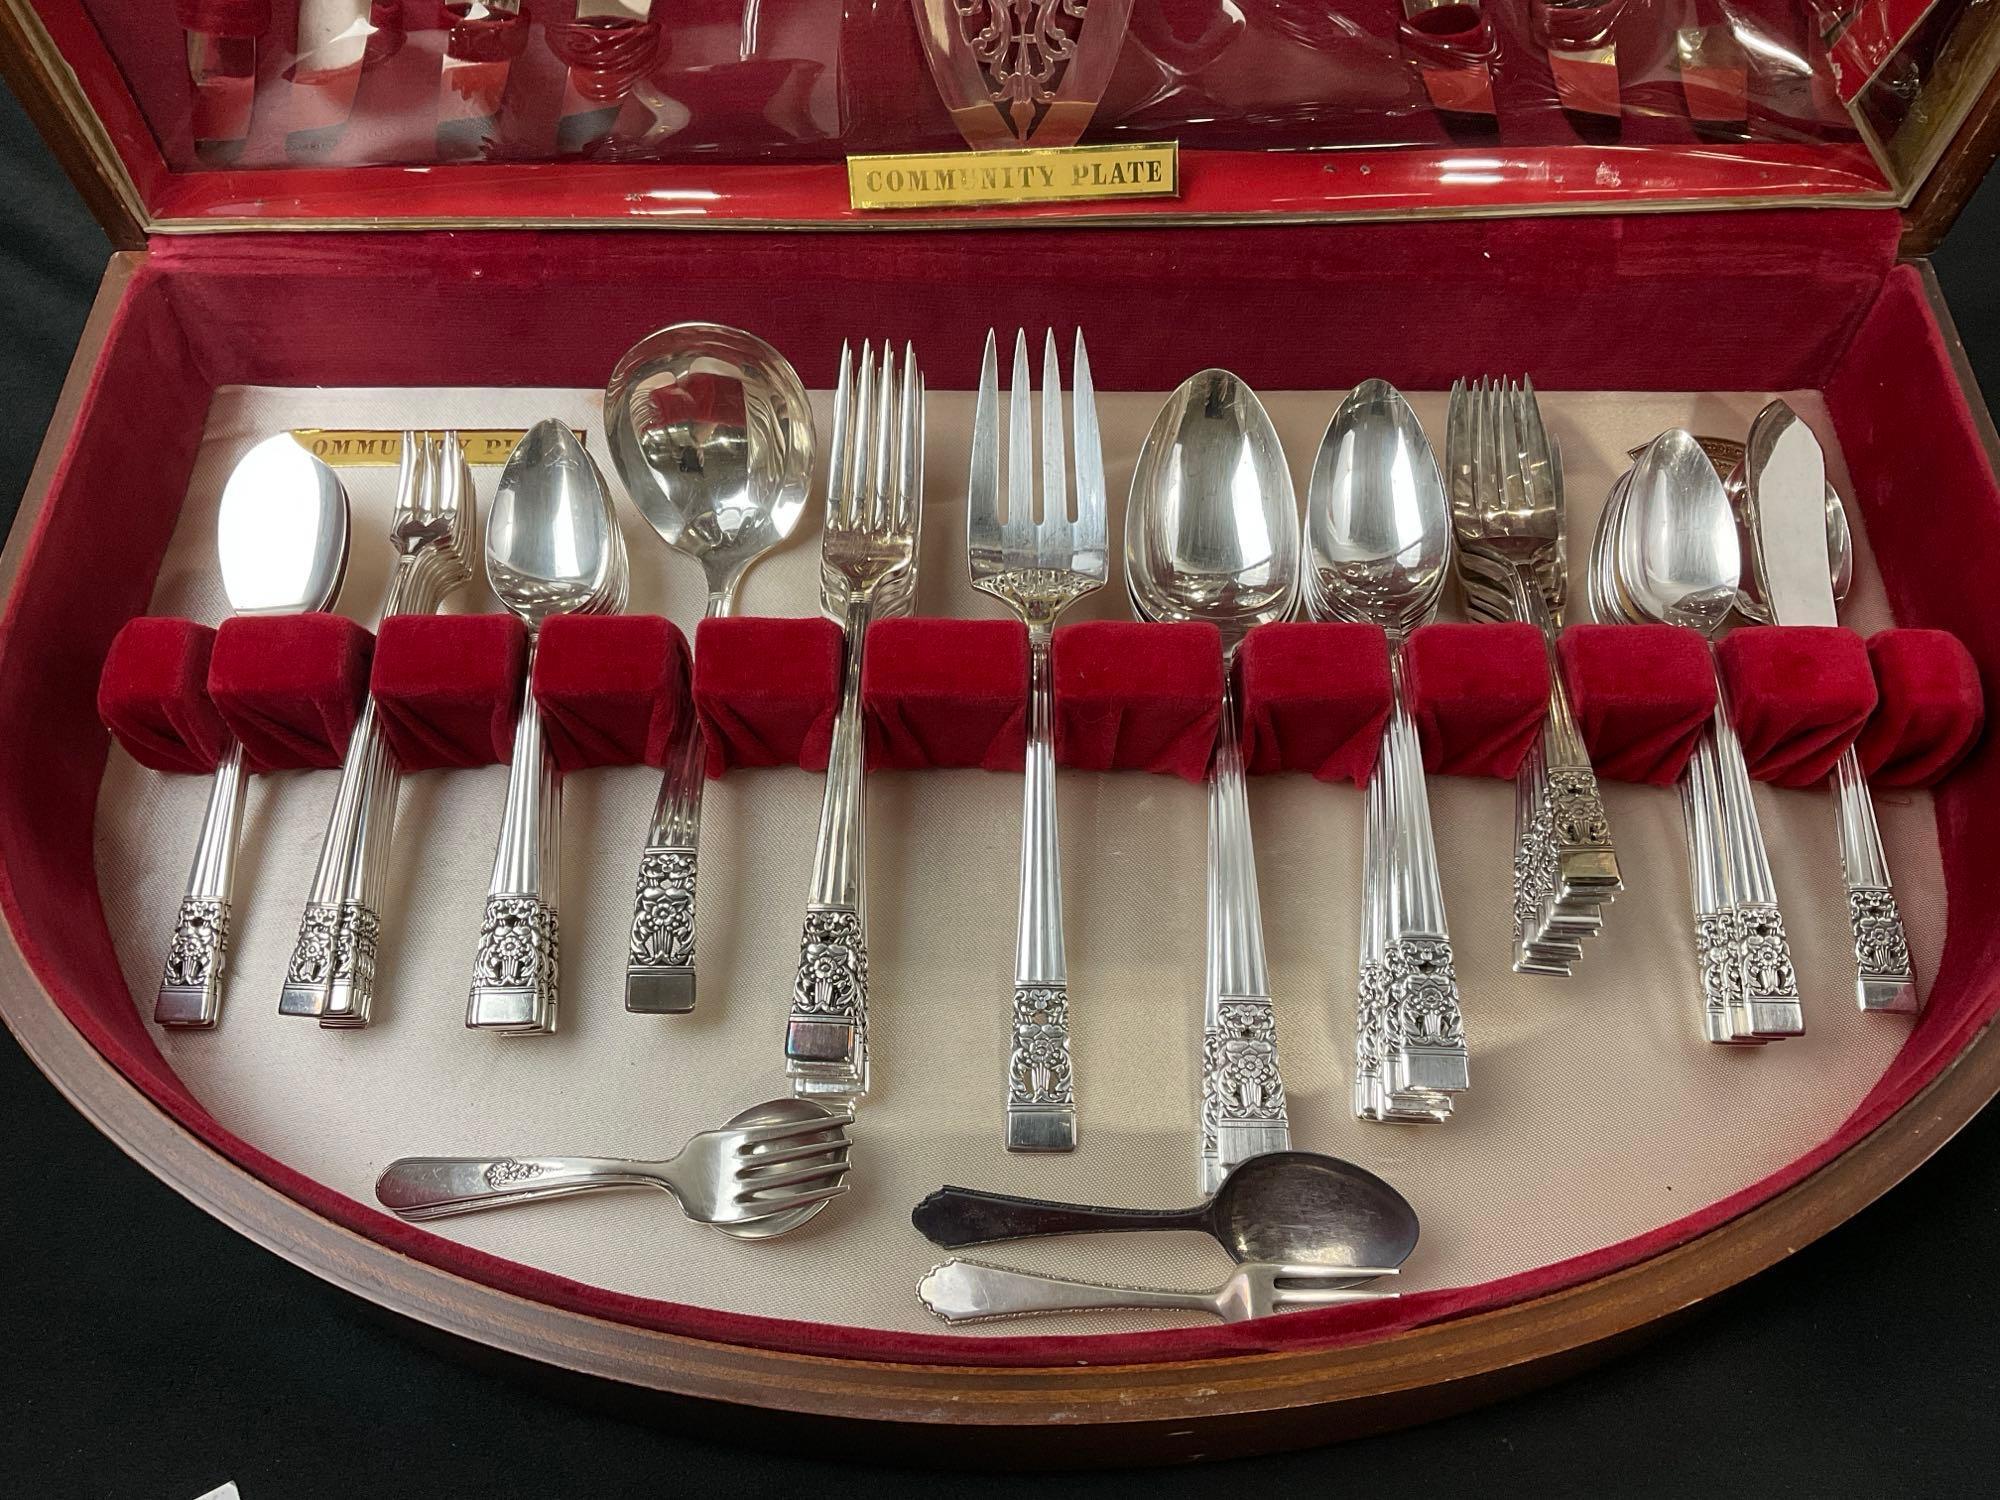 Community Plate Silver plated Flatware w/ Case, approx 60 pcs & 2 Sterling Silver pcs, ~30 grams